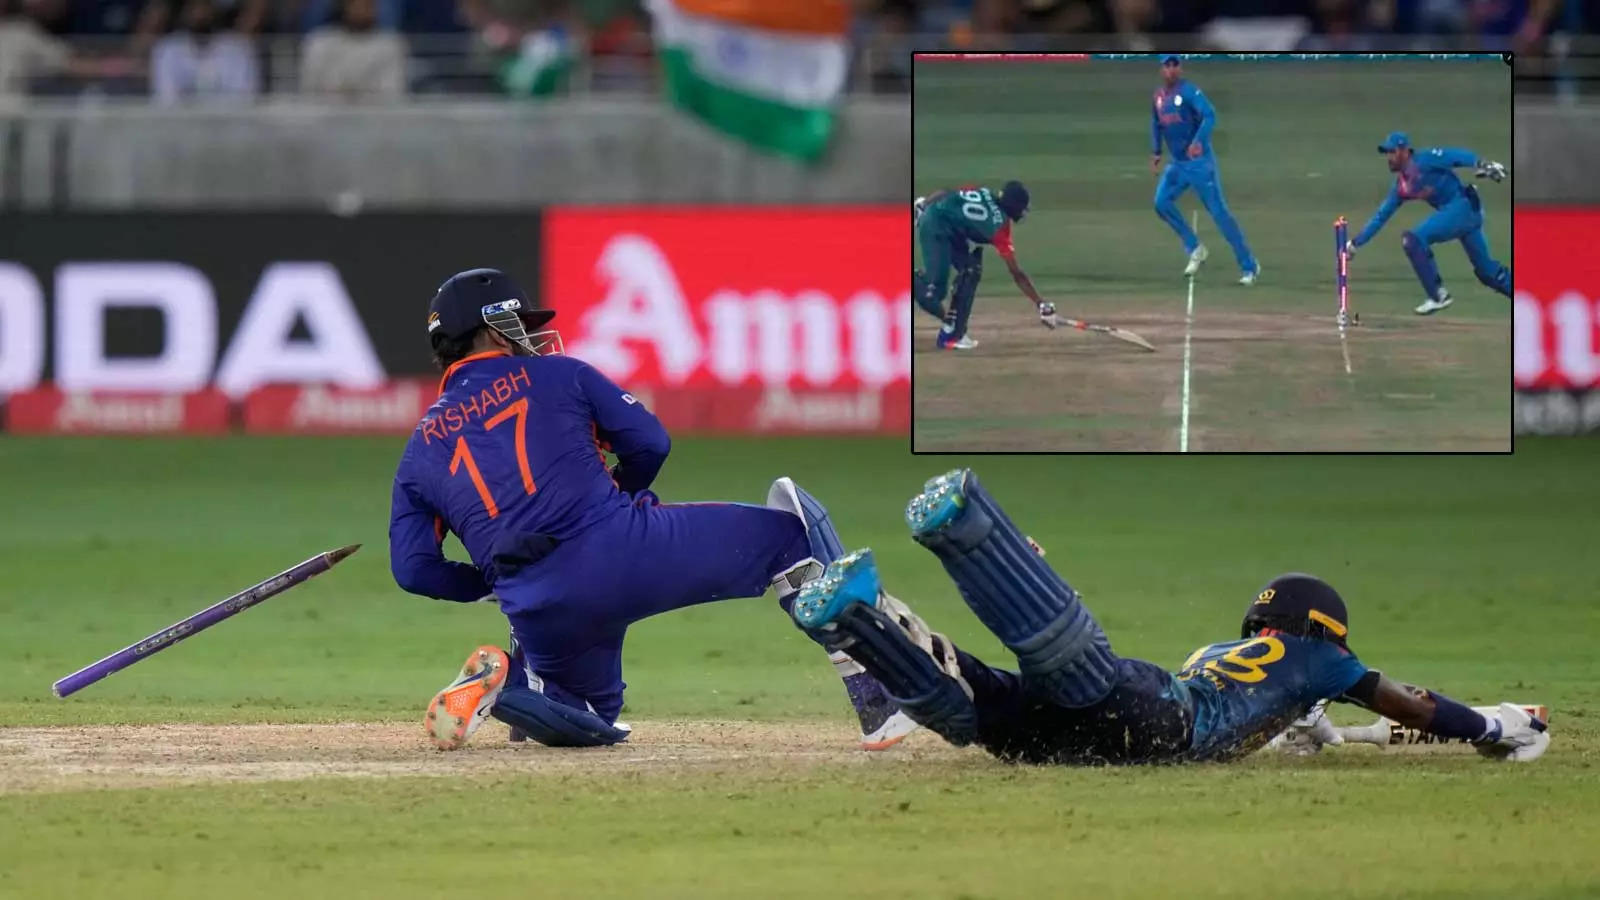 ​Rishabh Pant has missed a run-out opportunity on penultimate ball of Asia Cup match​ against Pakistan